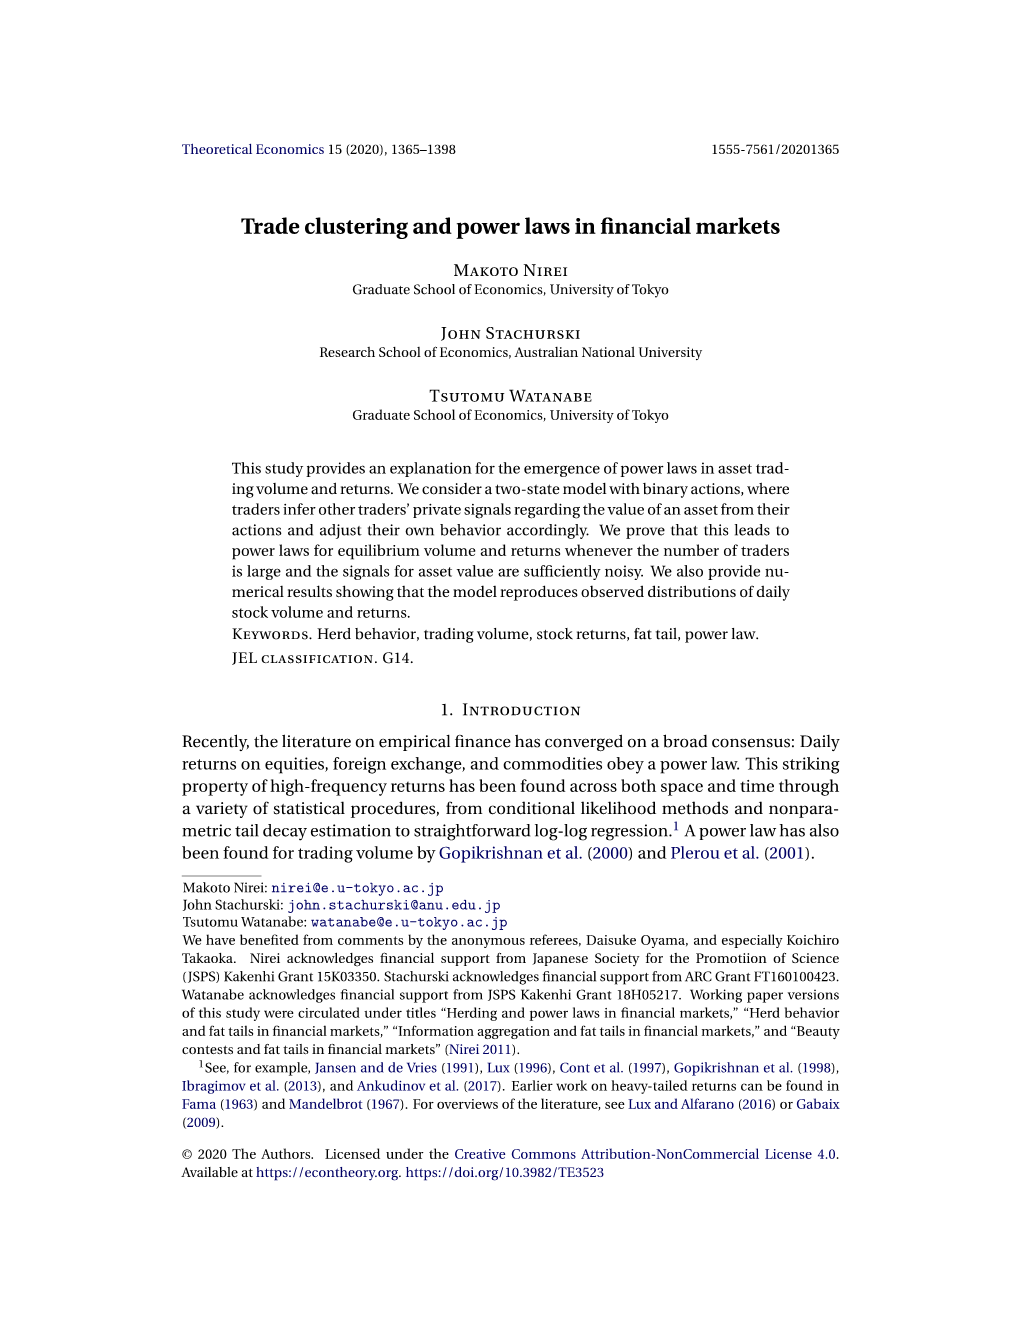 Trade Clustering and Power Laws in Financial Markets